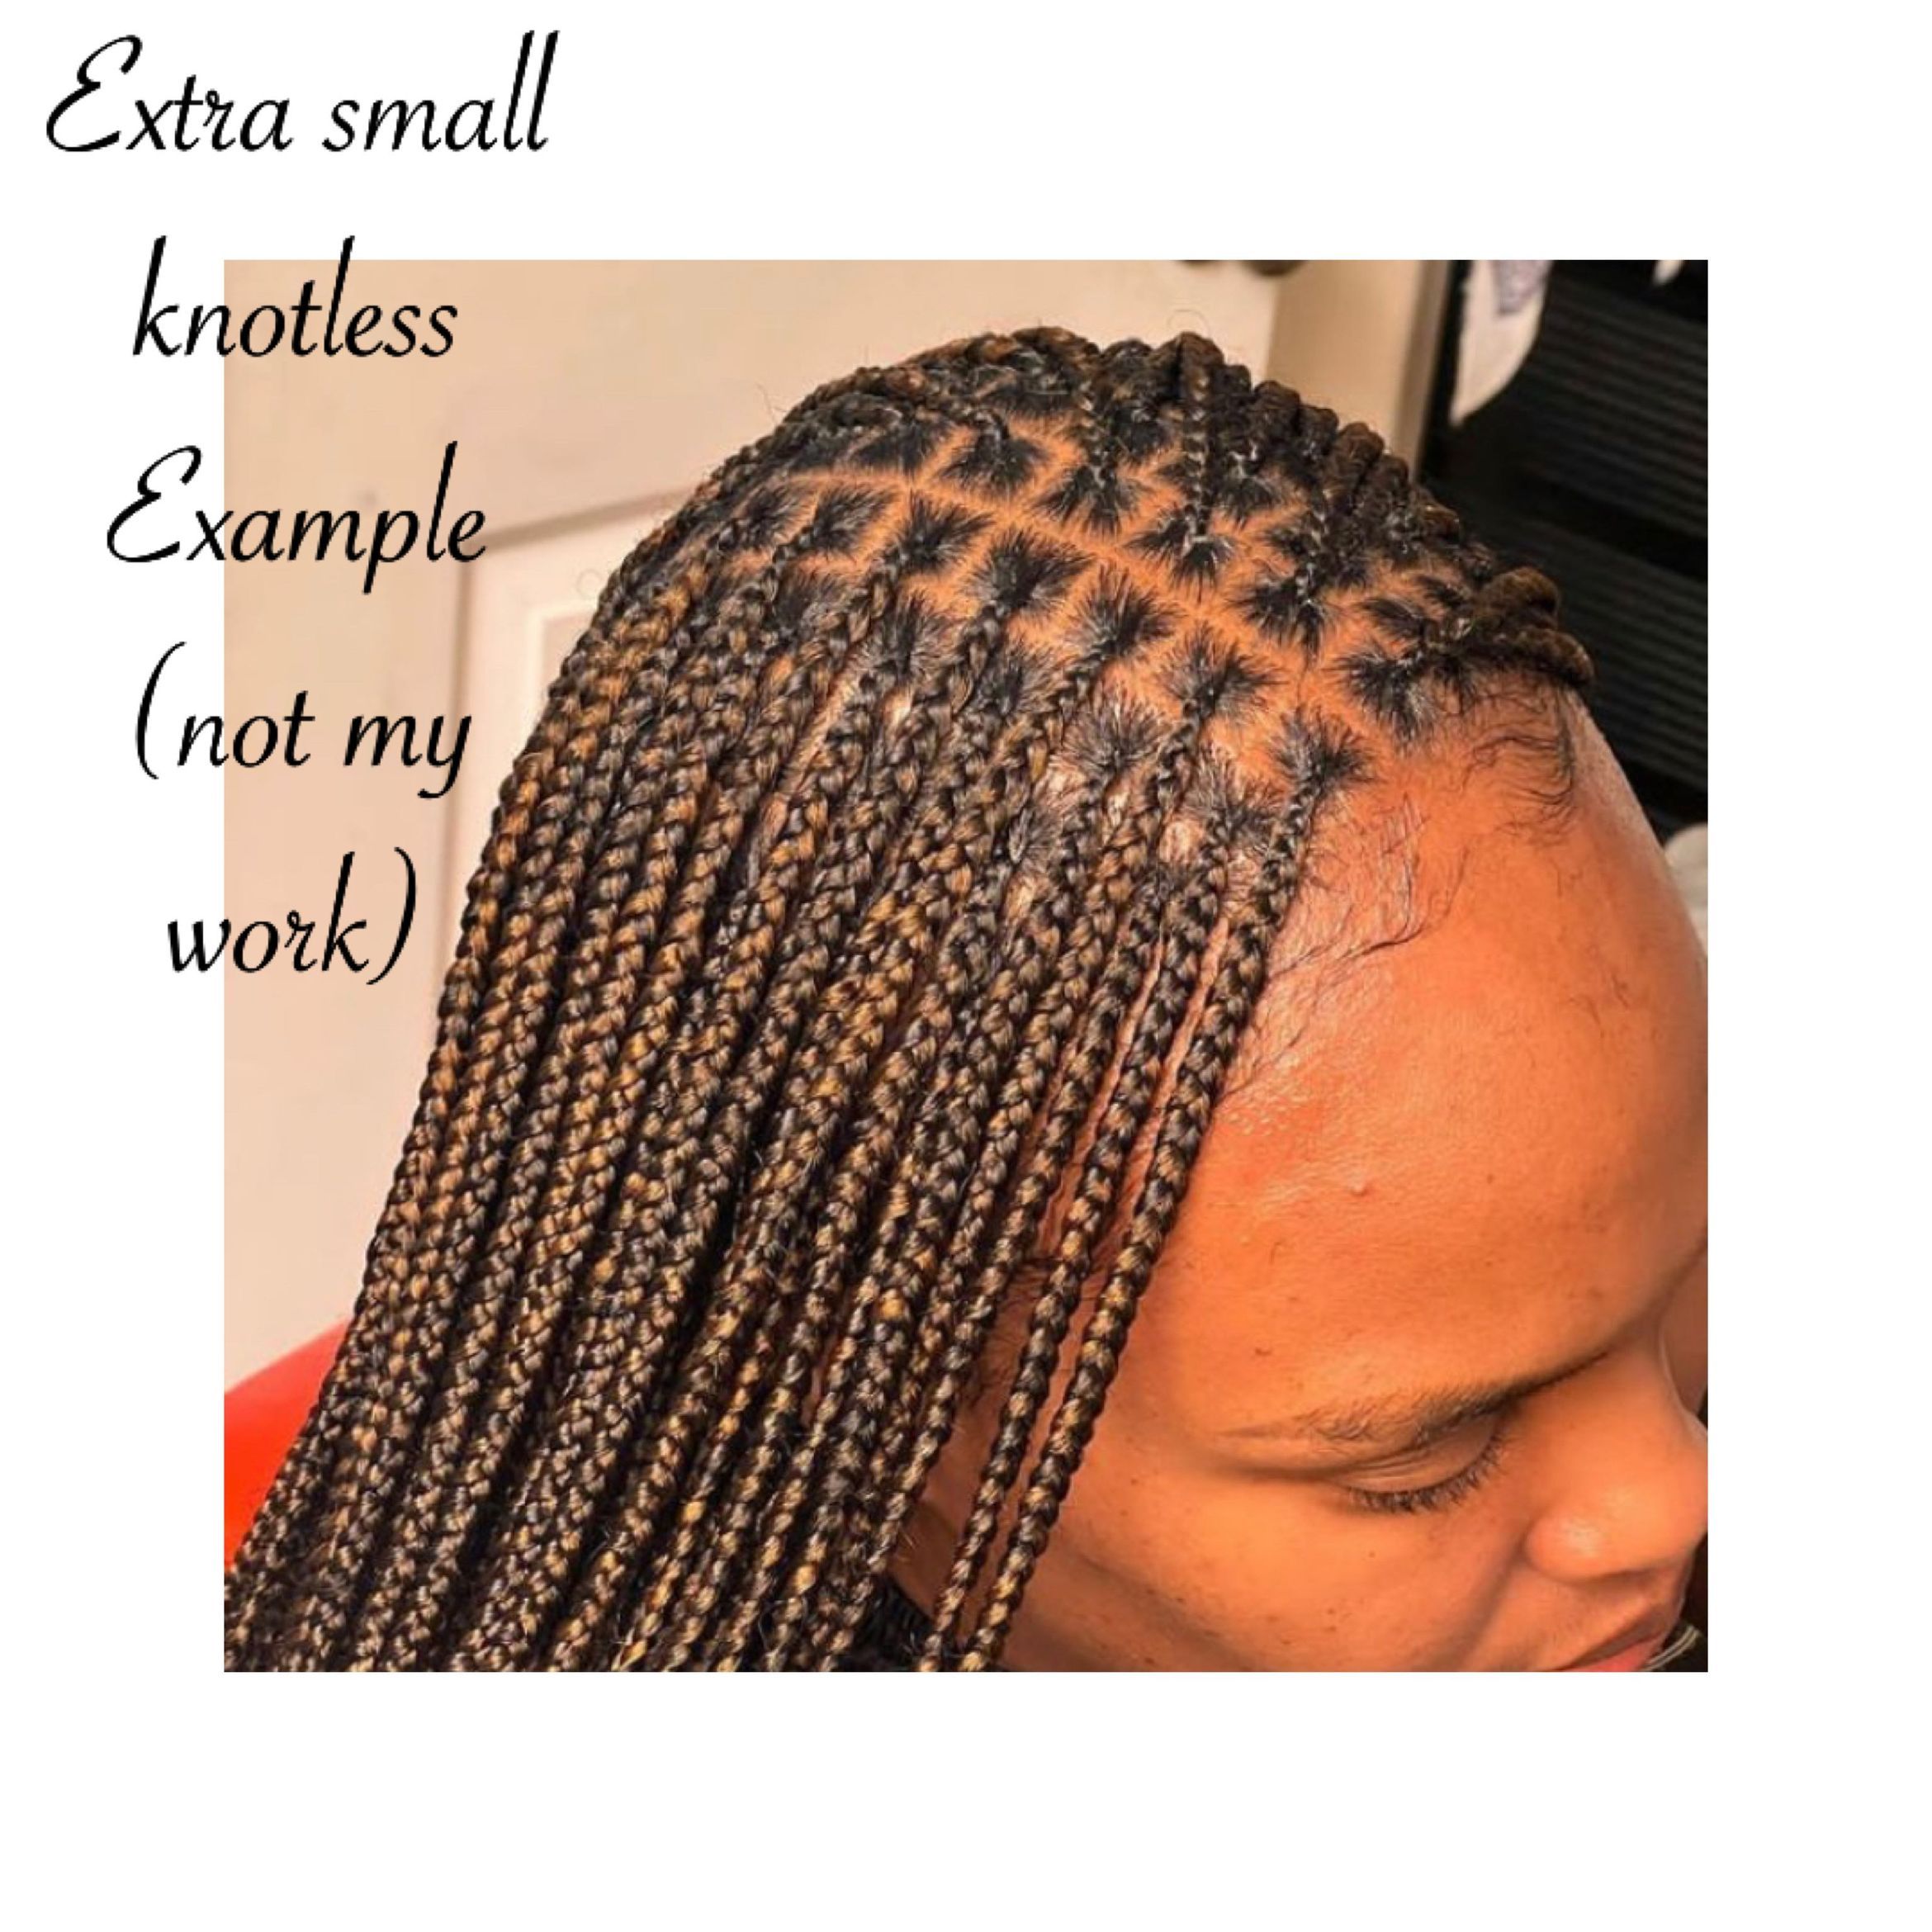 Extra Small Knotless 26’ hair included portfolio